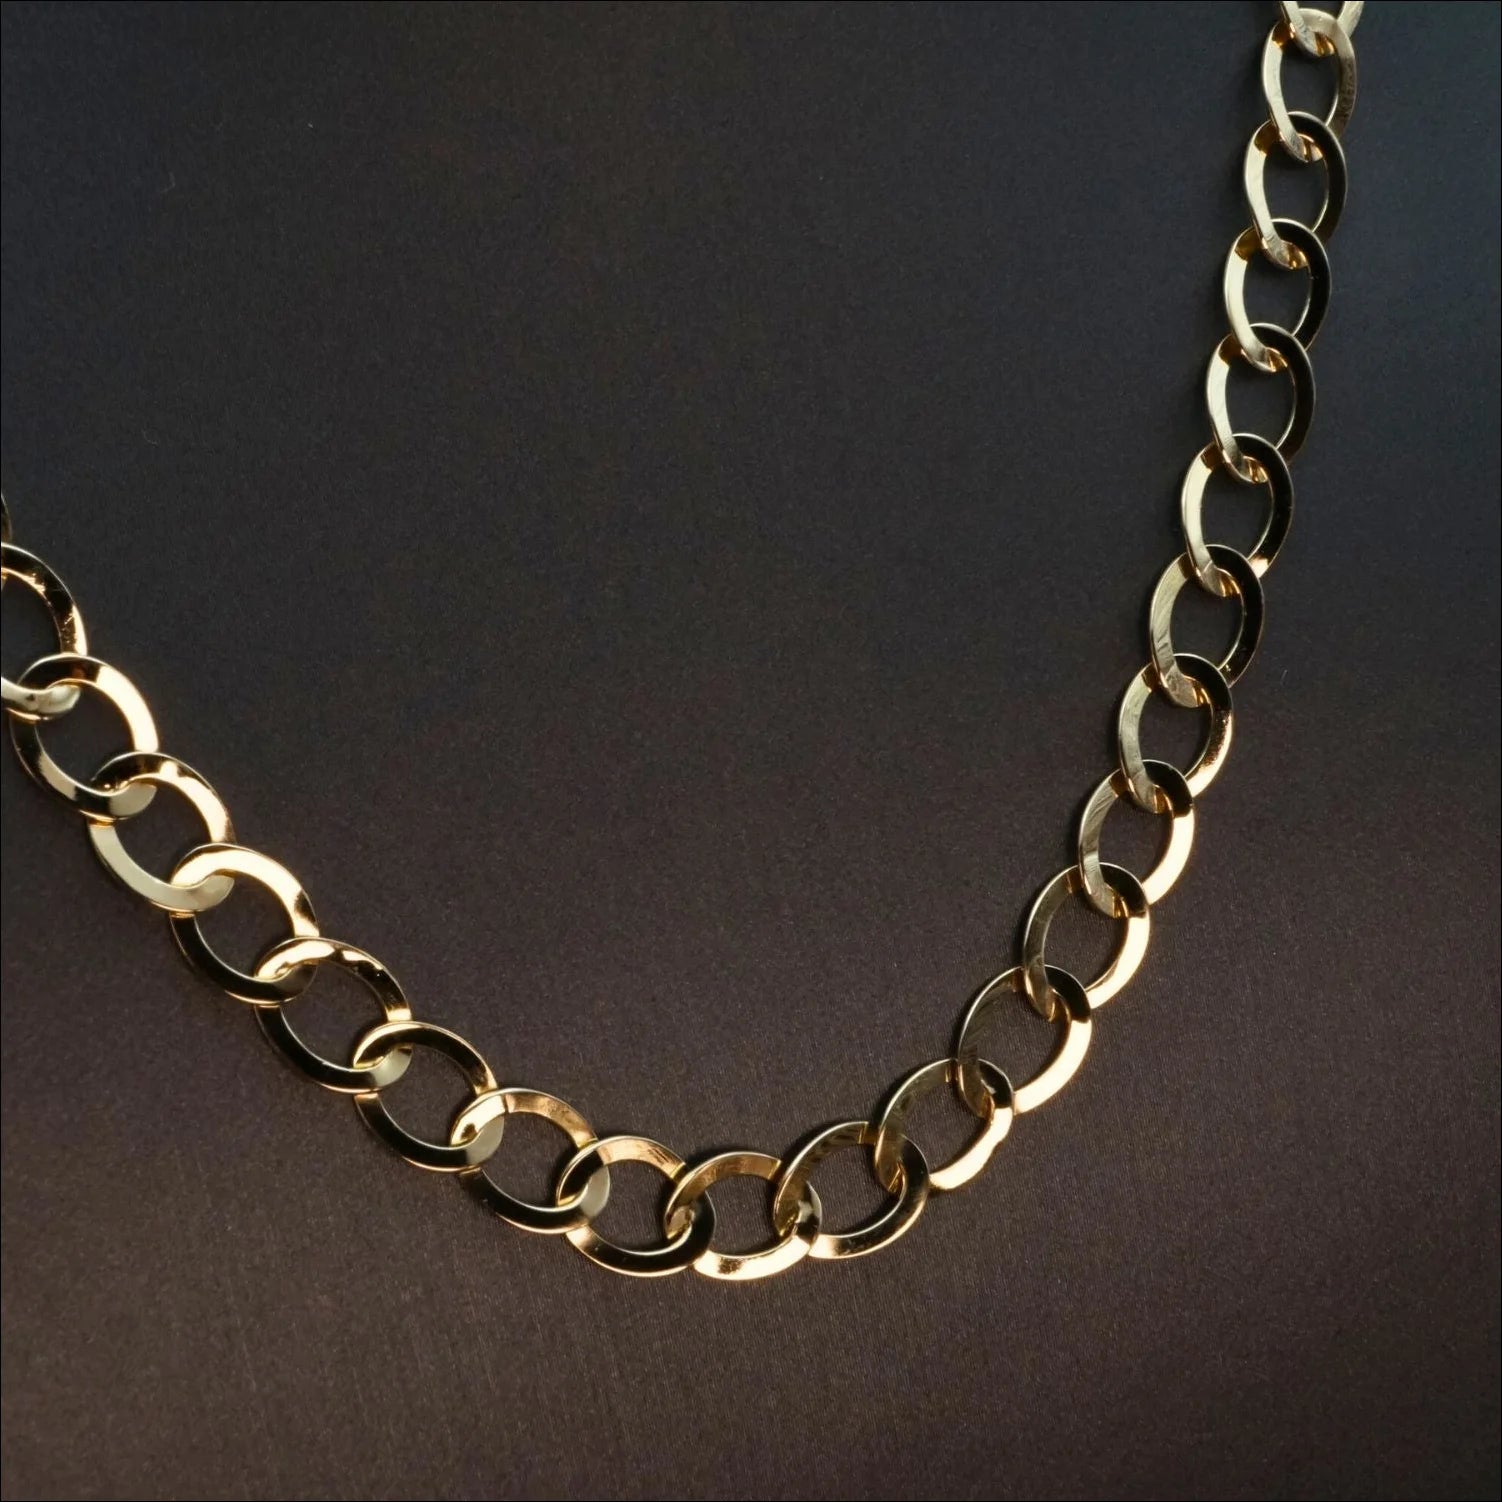 18k gold link chain - classic style | Chains